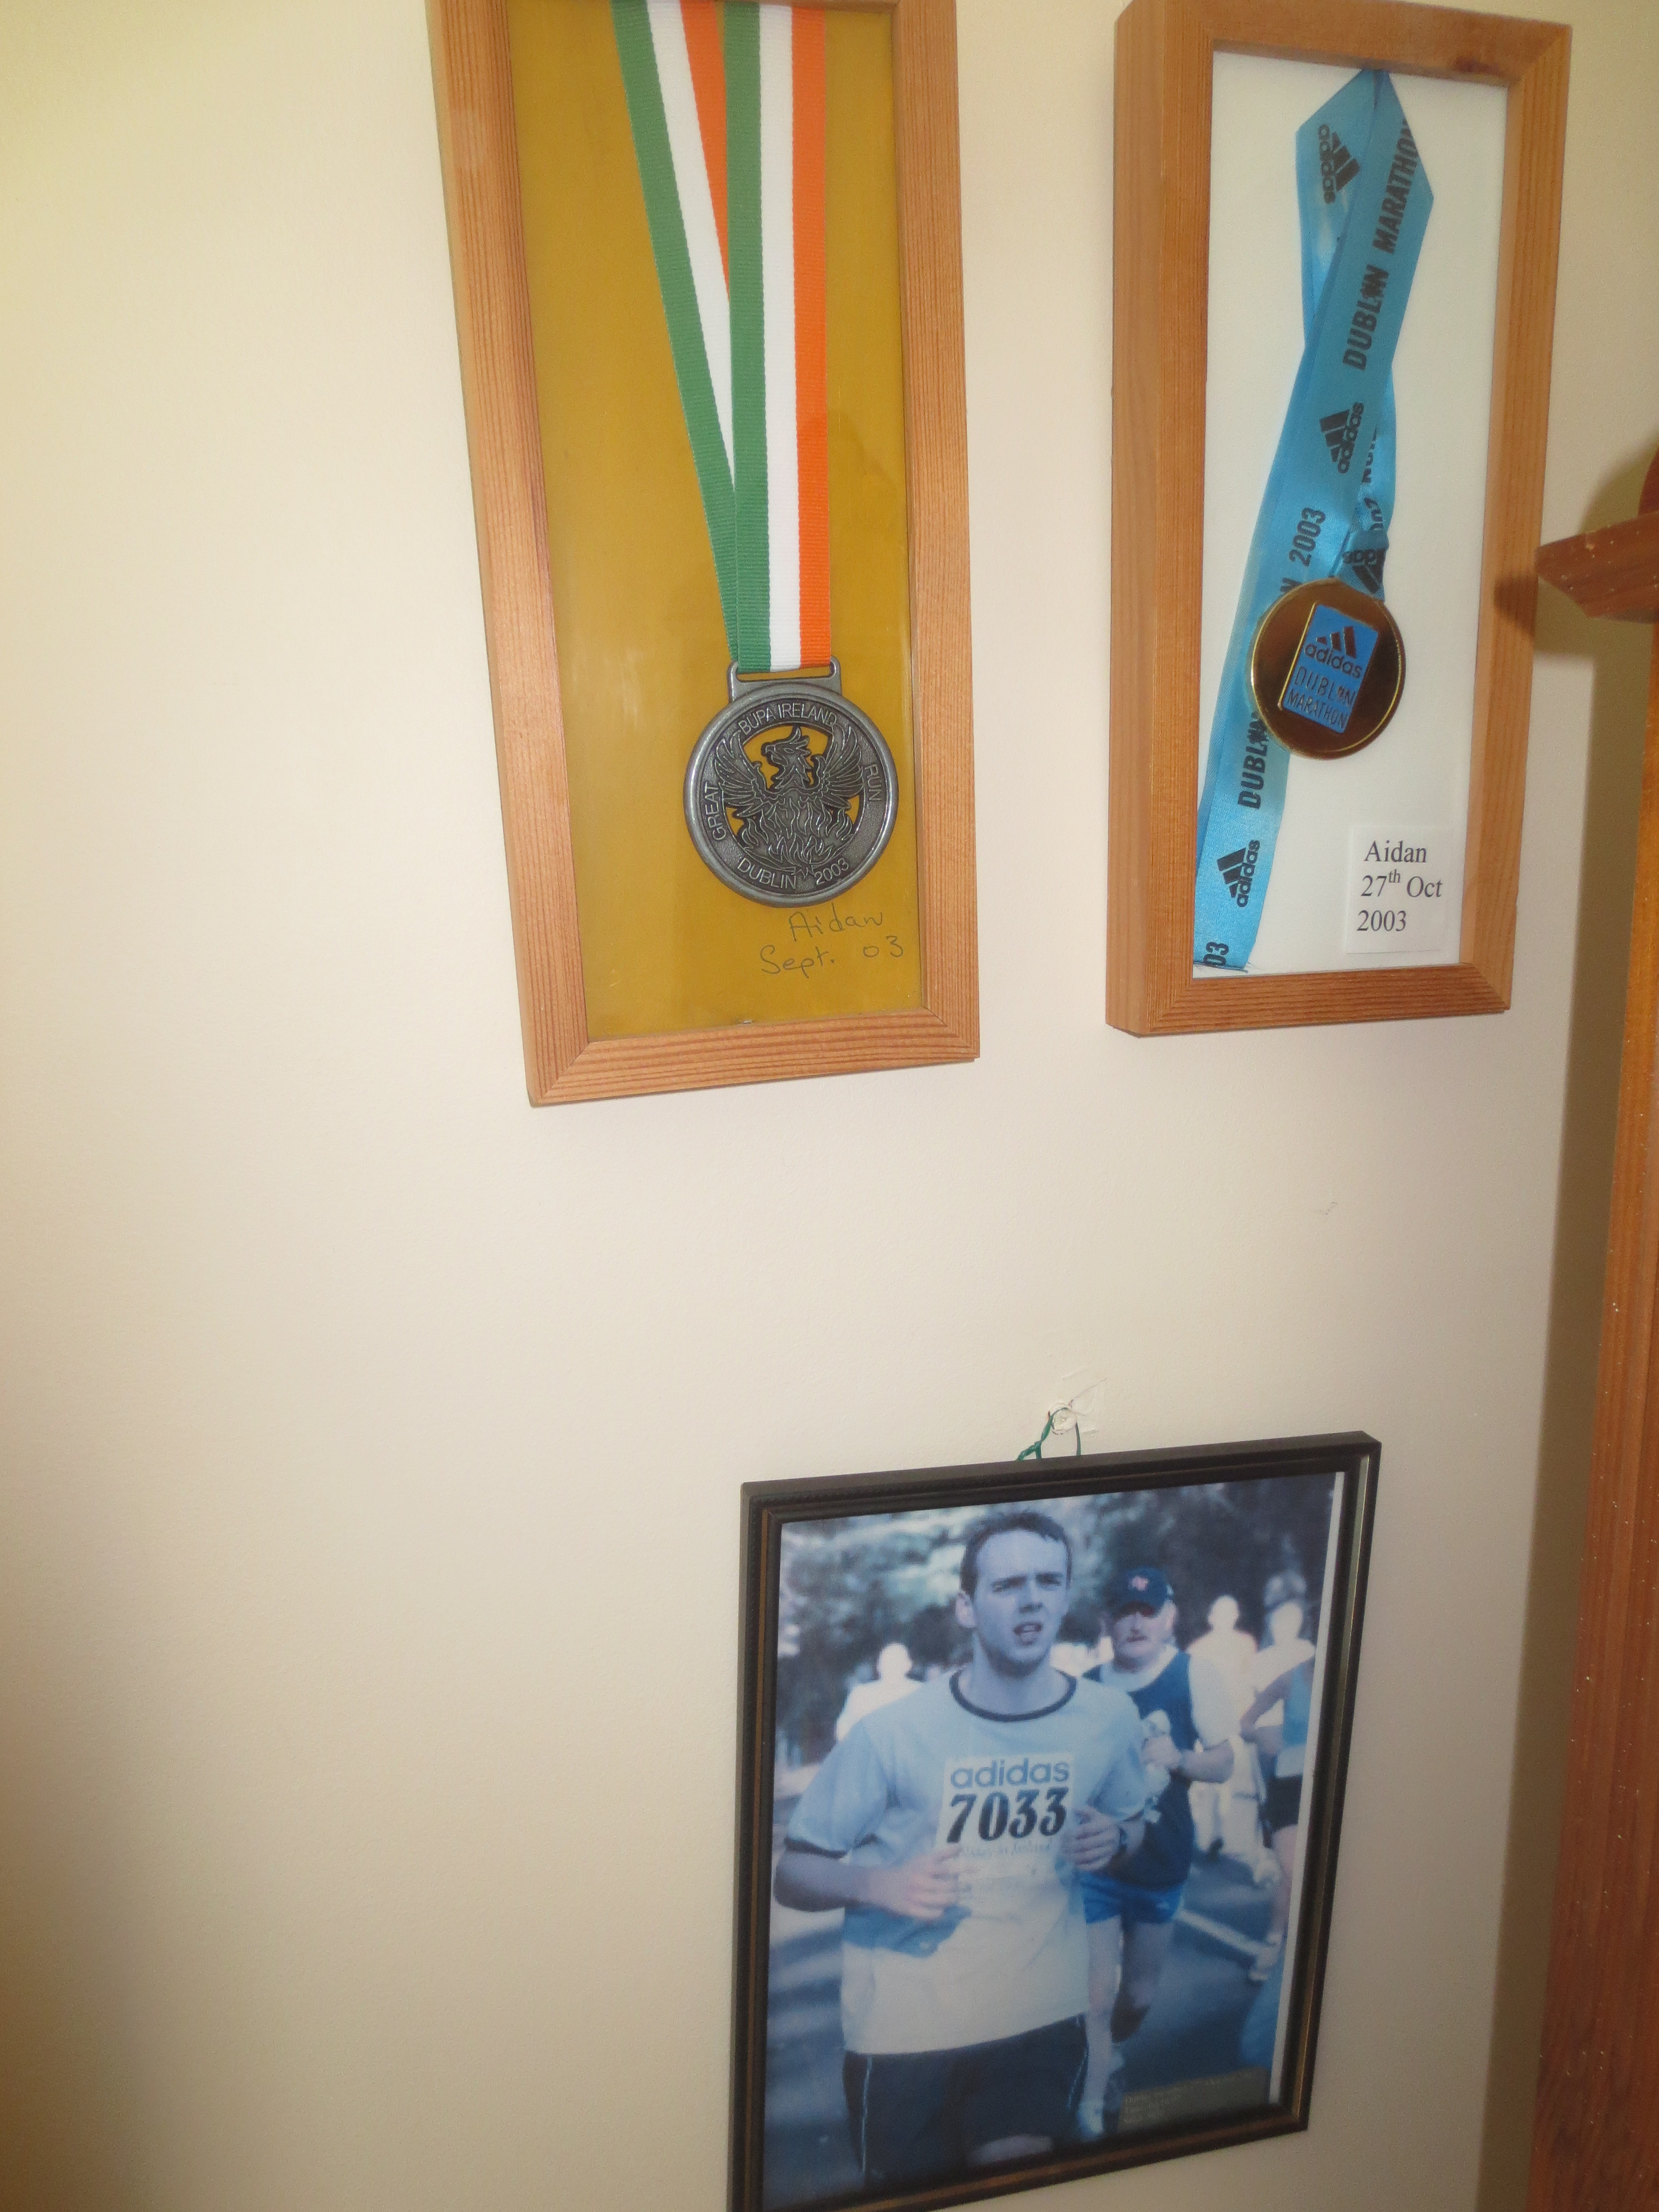 My Short and Illustrious Career as a Runner (bookshelved moved back into place once picture was taken!)